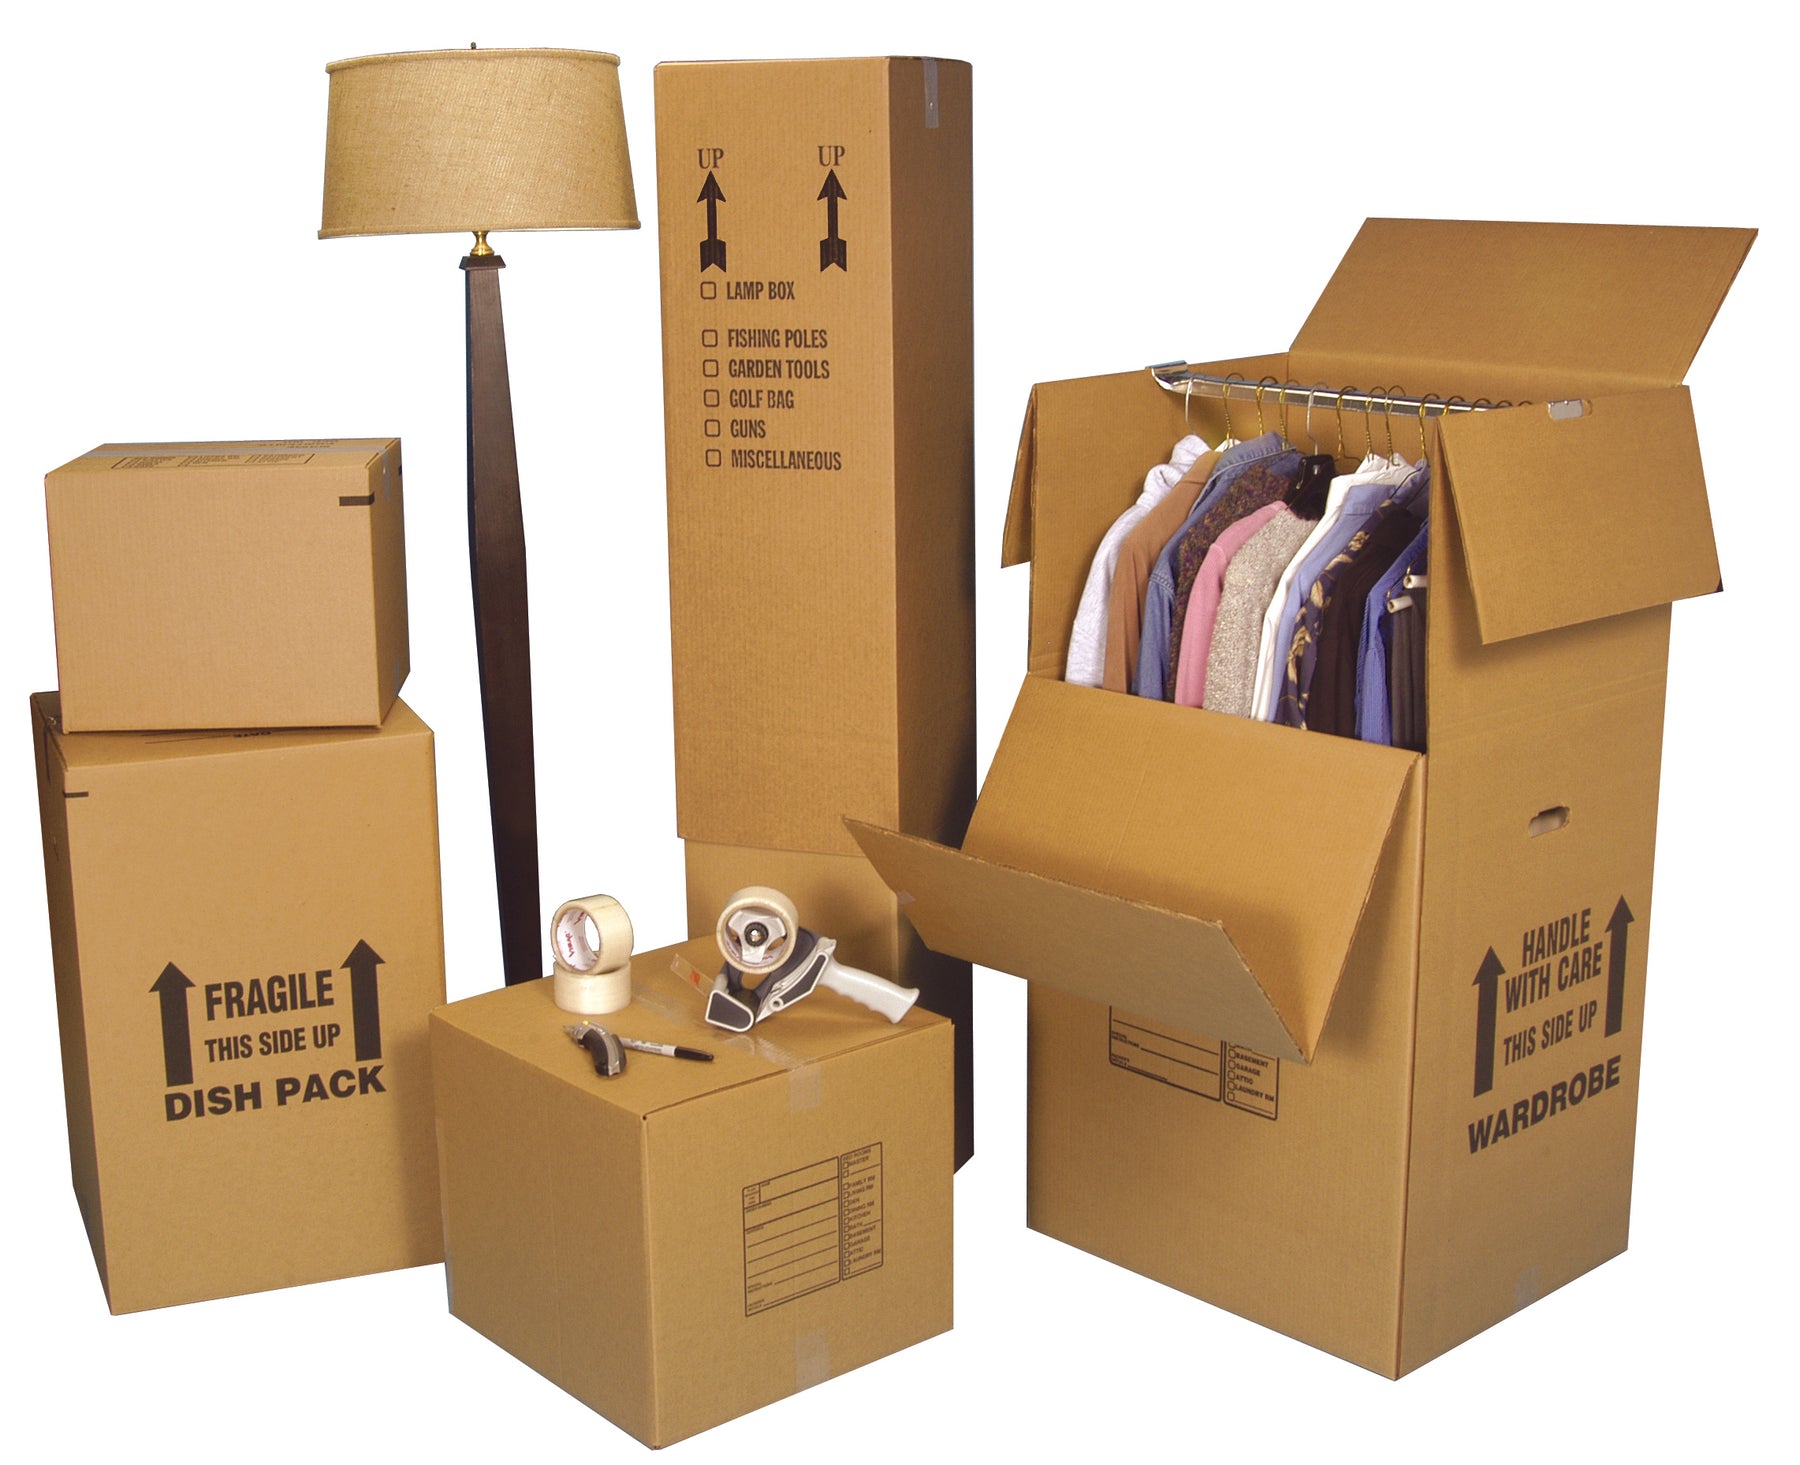 Boxes for Packing, Shipping & Moving